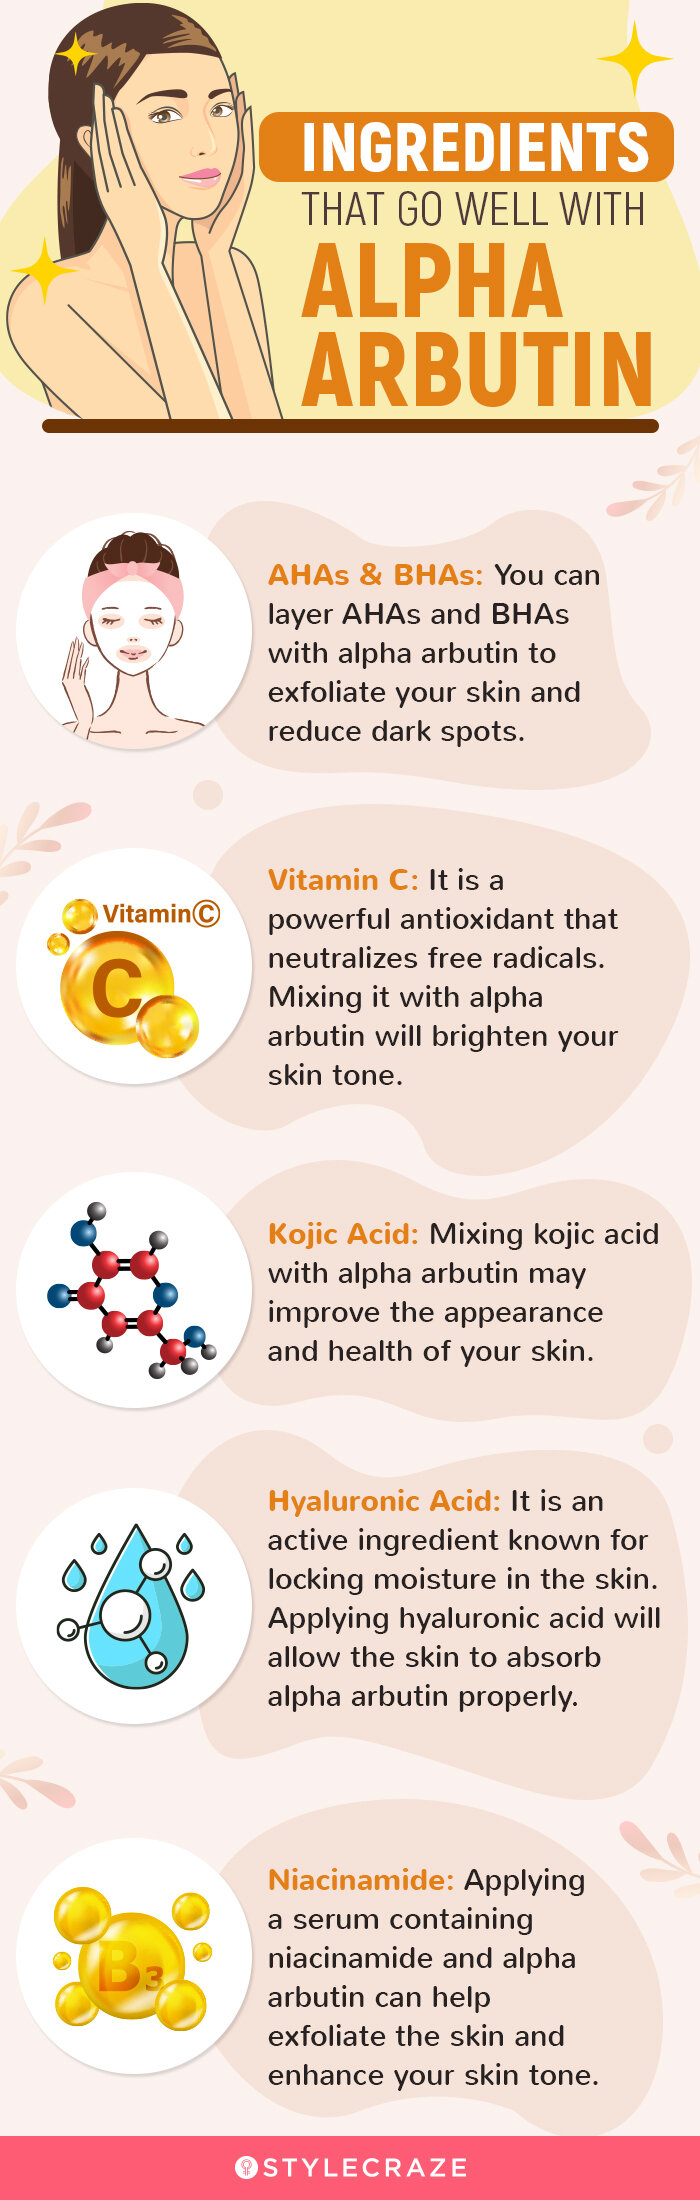 What’s The Role Of Arbutin In Treating Hyperpigmentation?